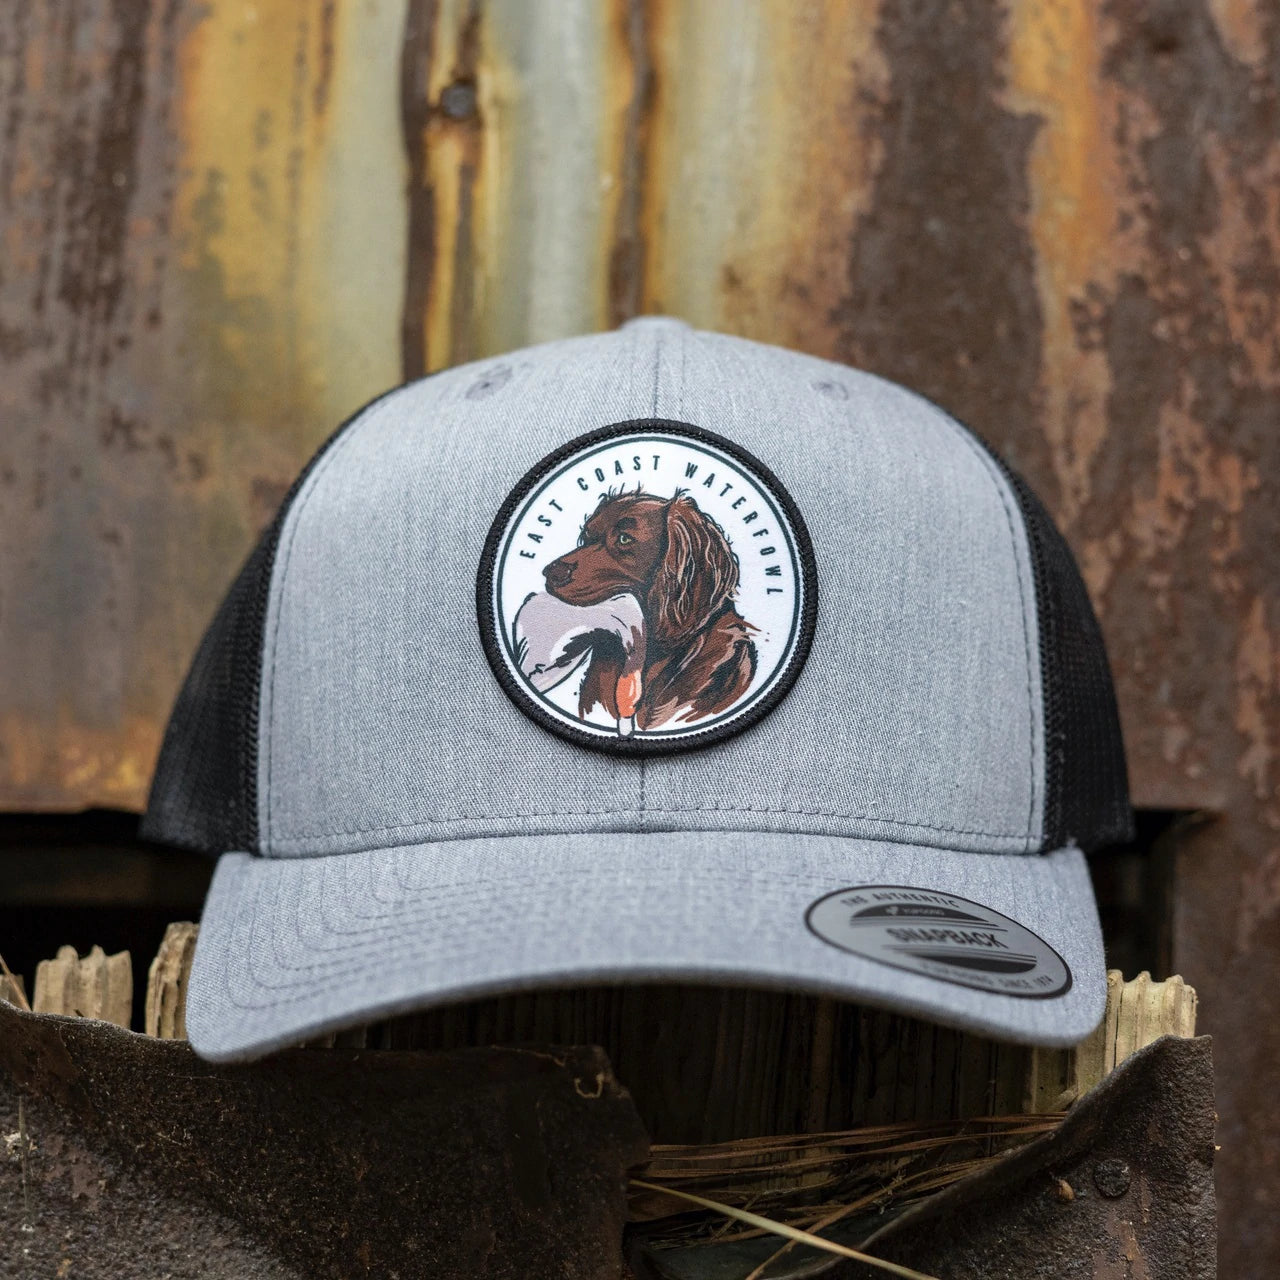 Chessie Dog Patch Trucker Hat by East Coast Waterfowl